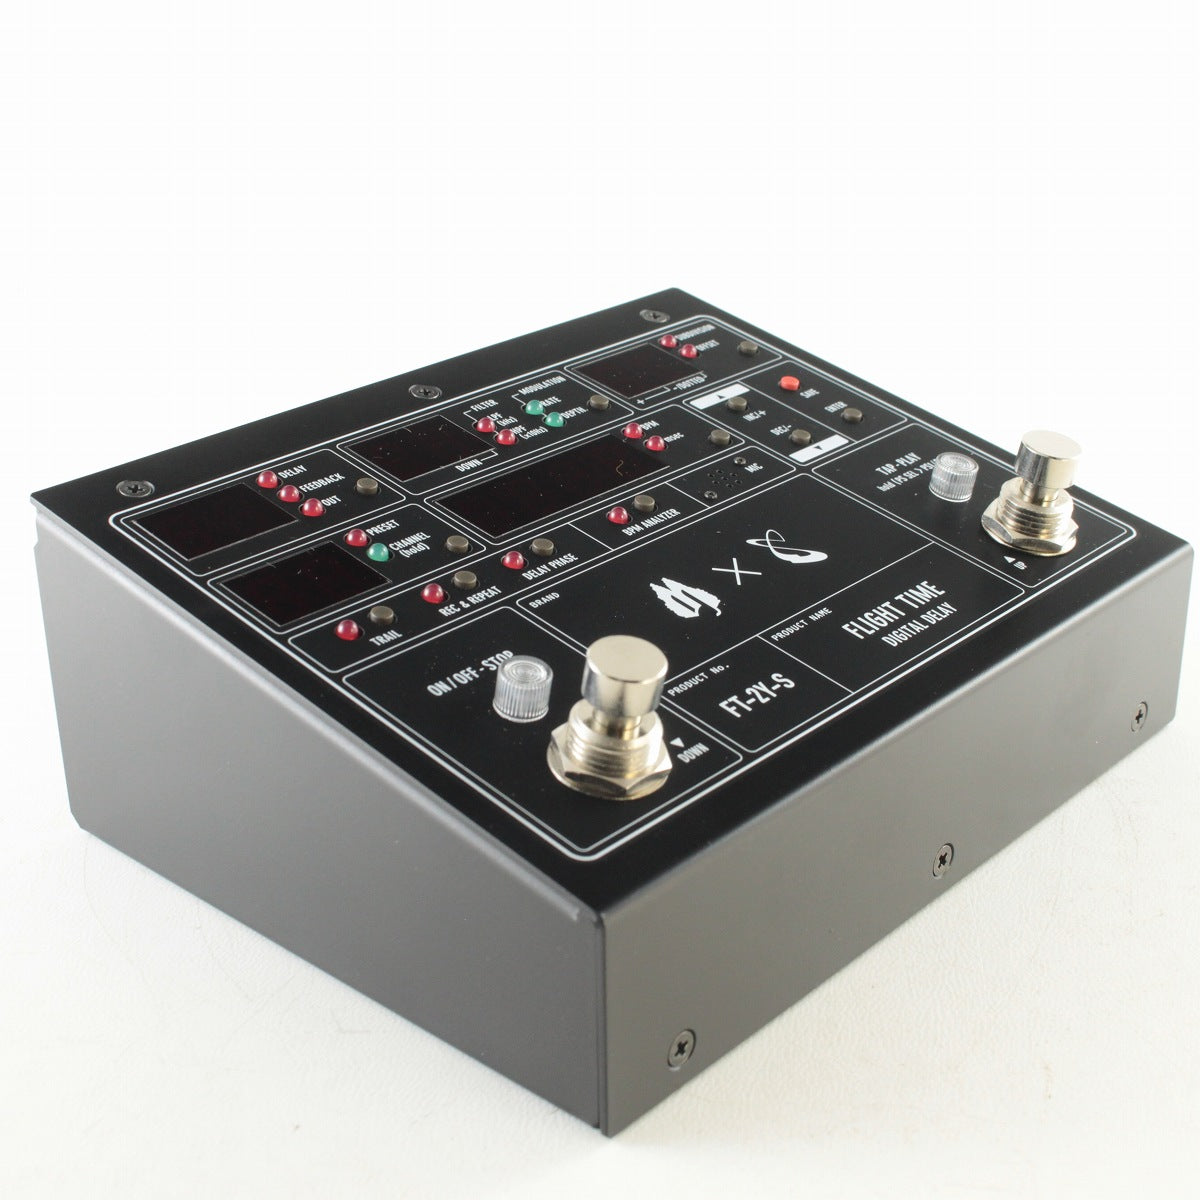 [SN 346A089] USED FREE THE TONE / FT-2Y-S [03]